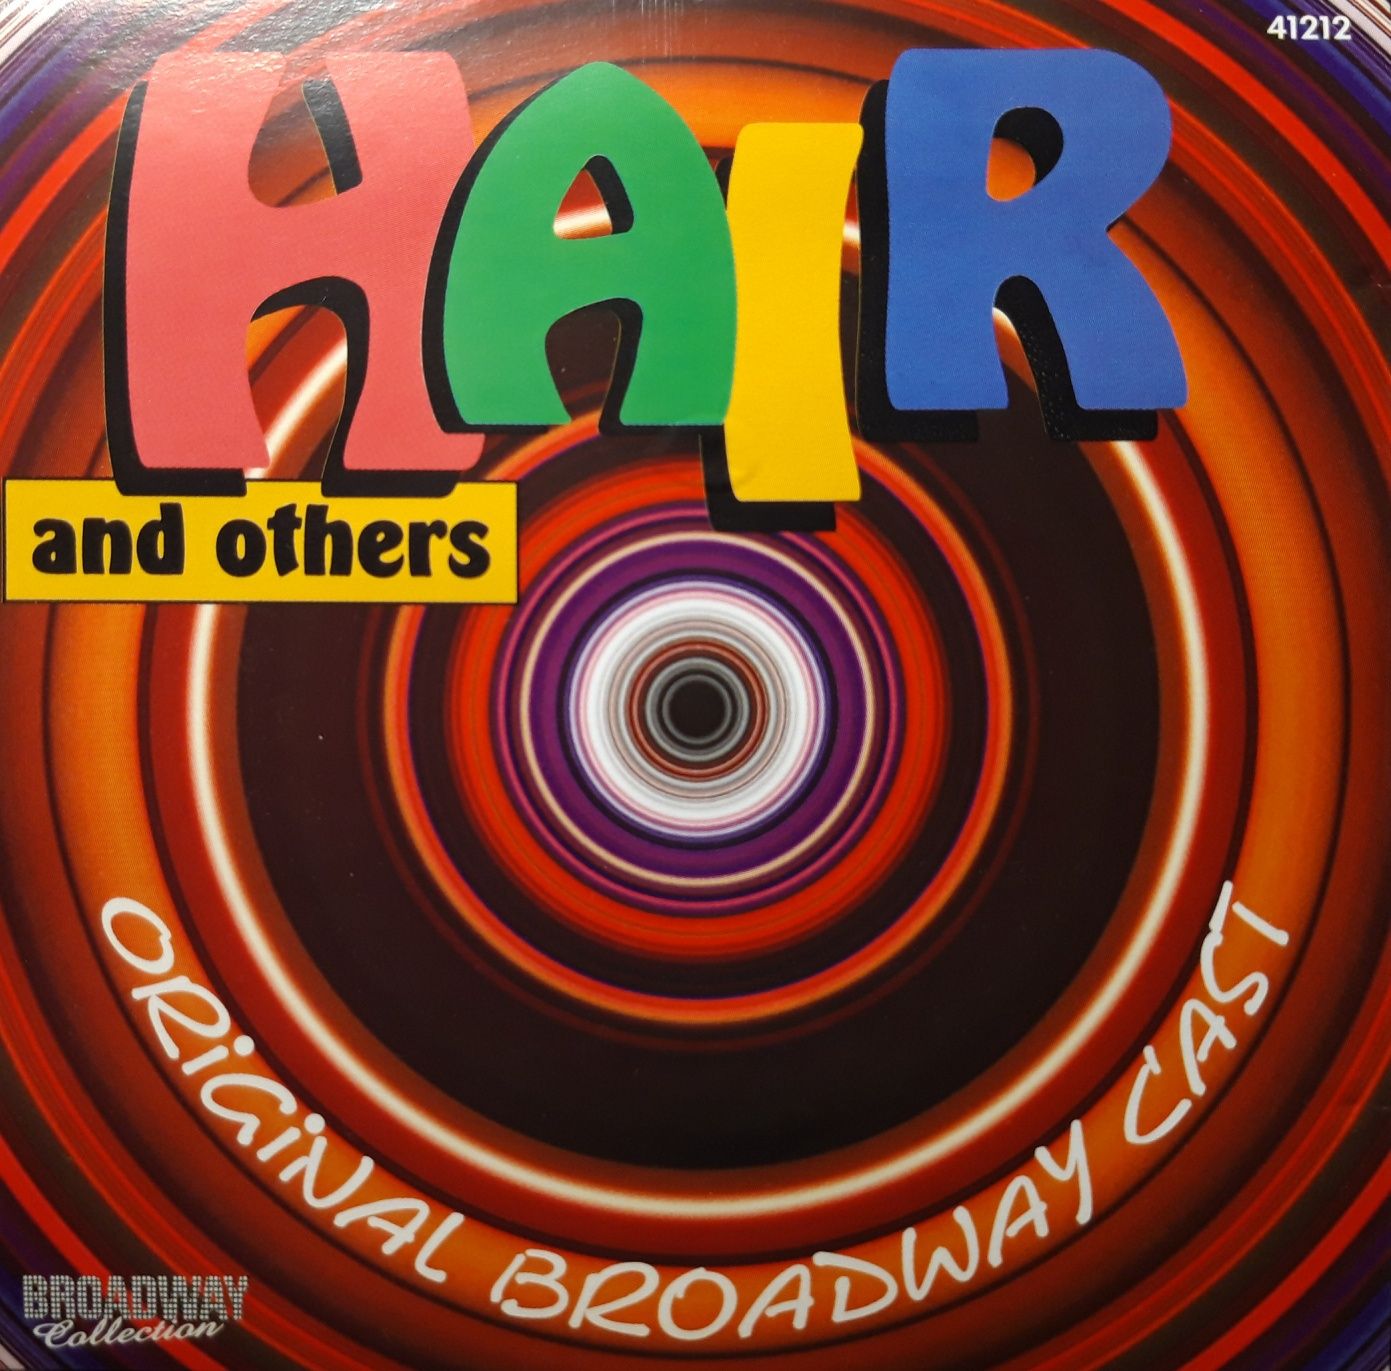 Hair And Others - Original Broadway Cast (CD, 20... ?)